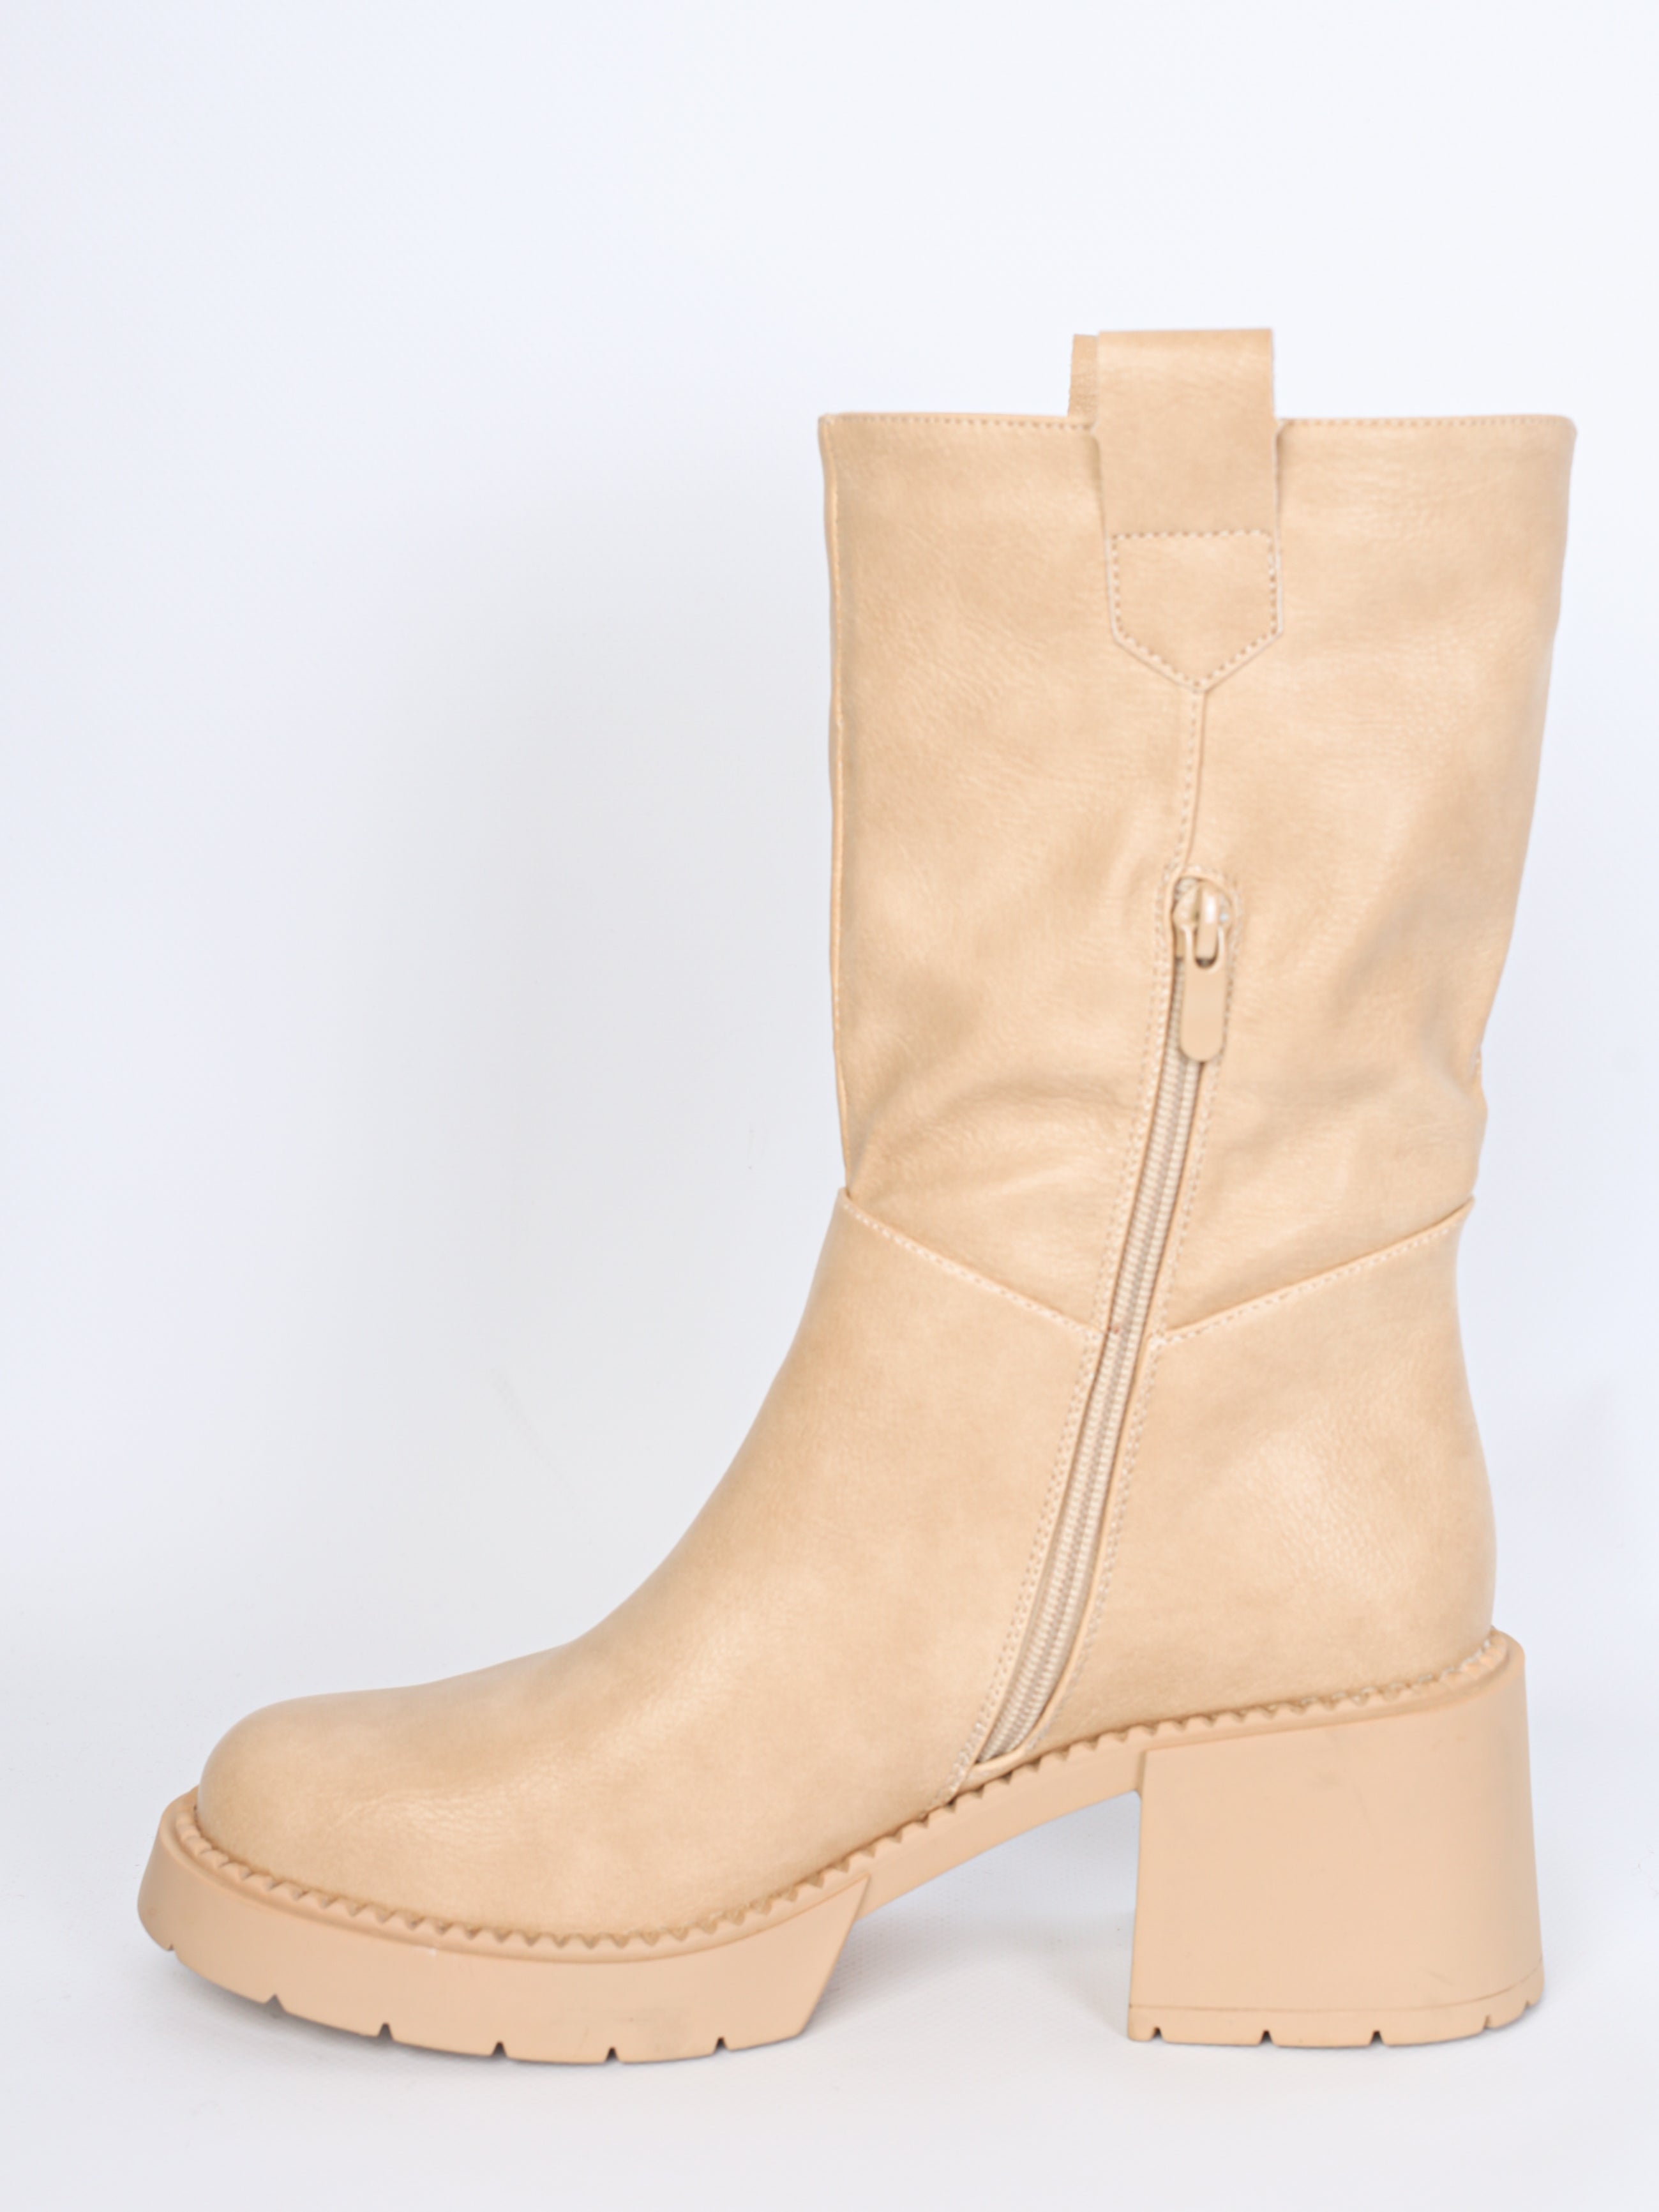 Chunky leather boot with heel